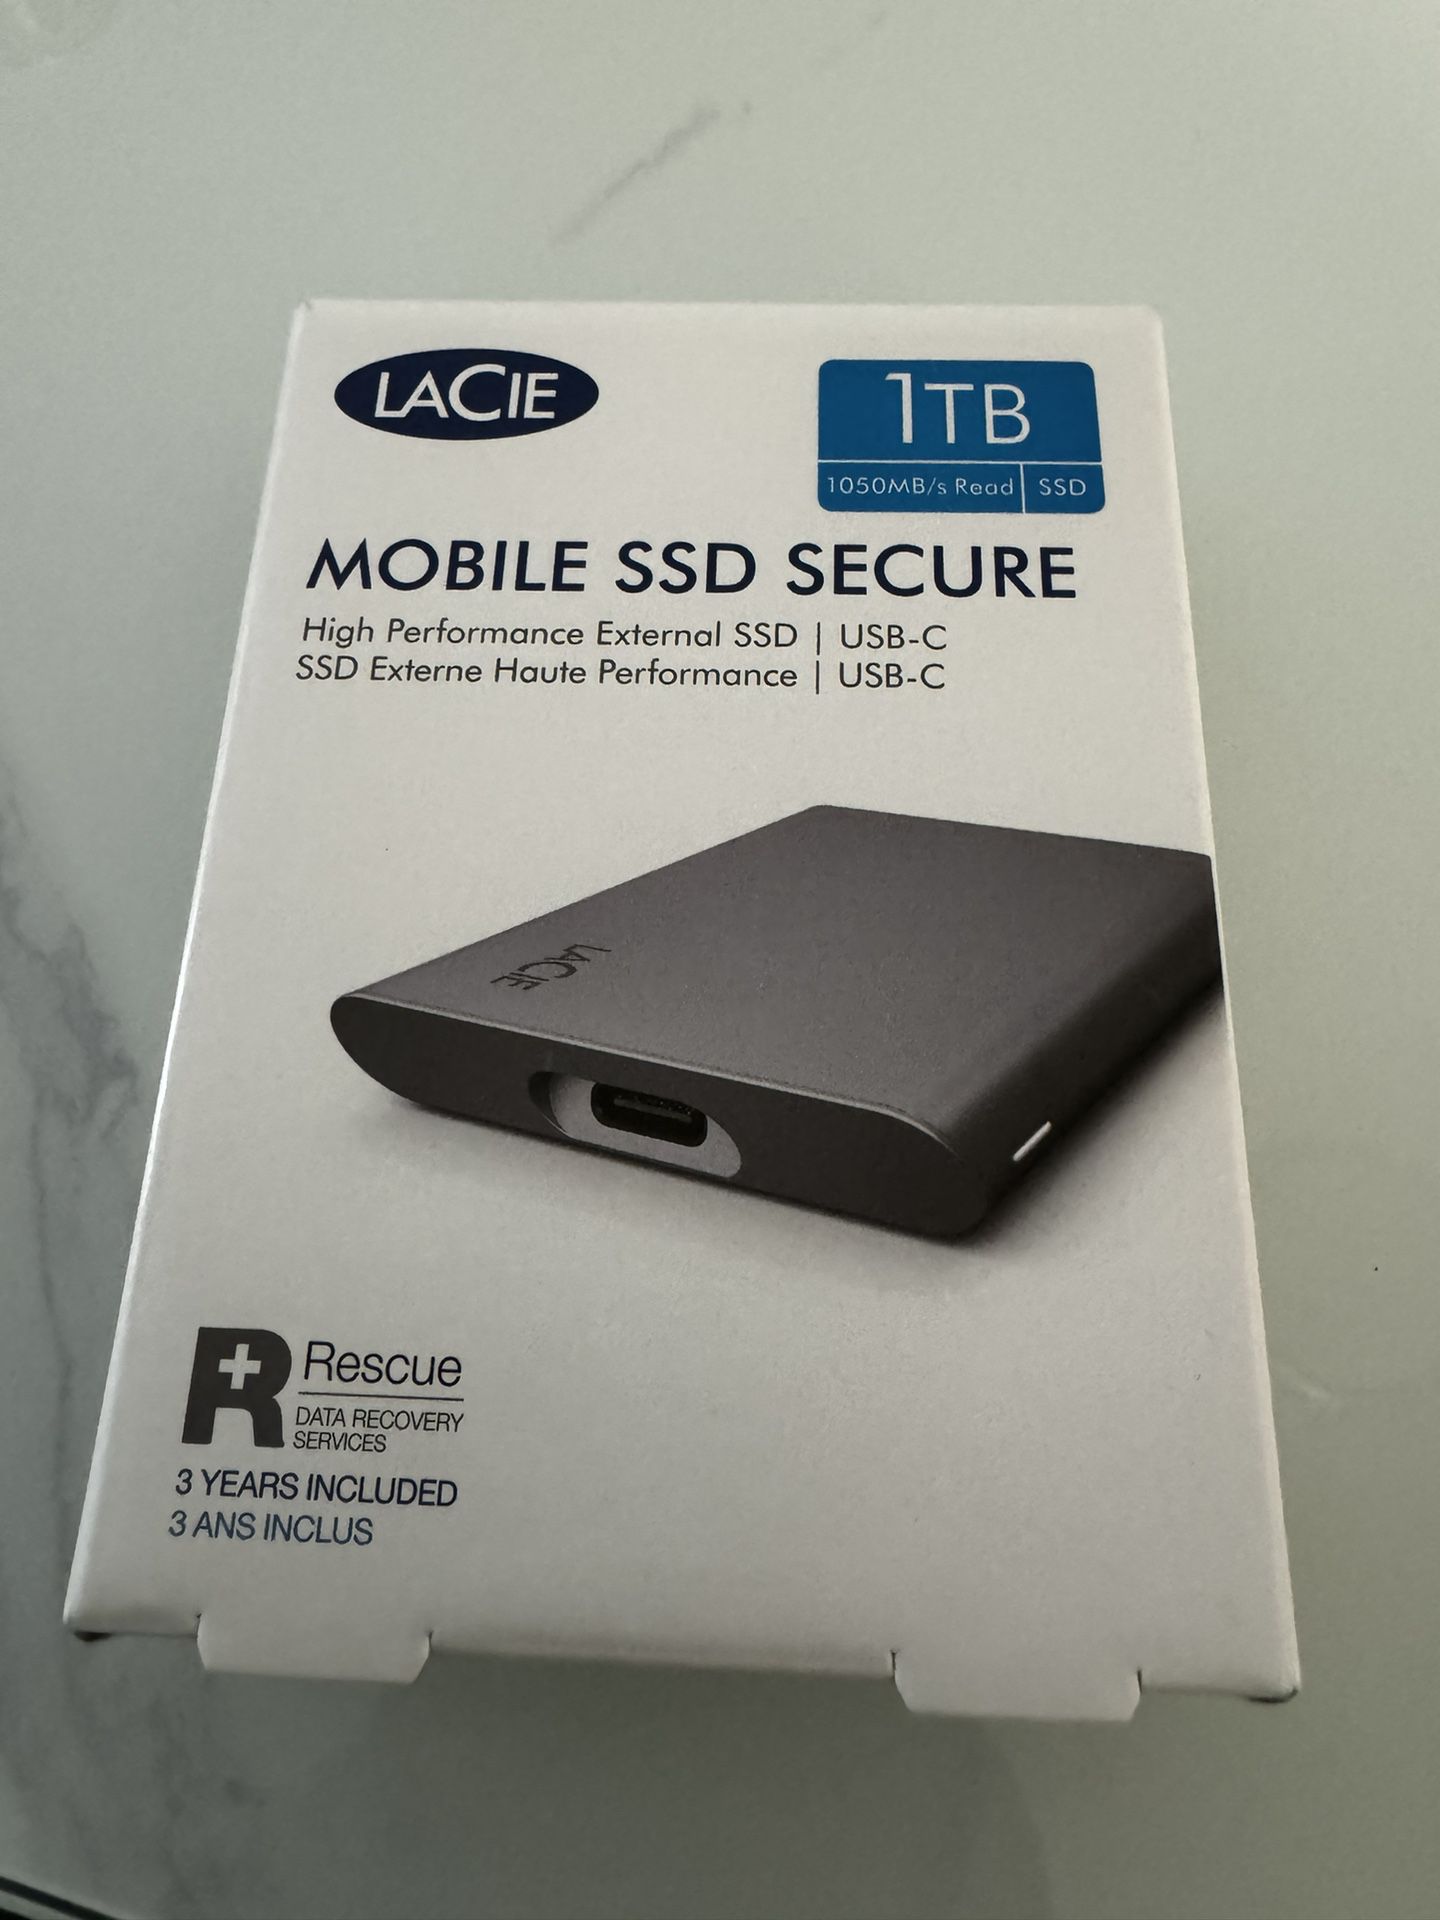  LaCie Mobile SSD Secure 1TB - Fast and Reliable External Storage 